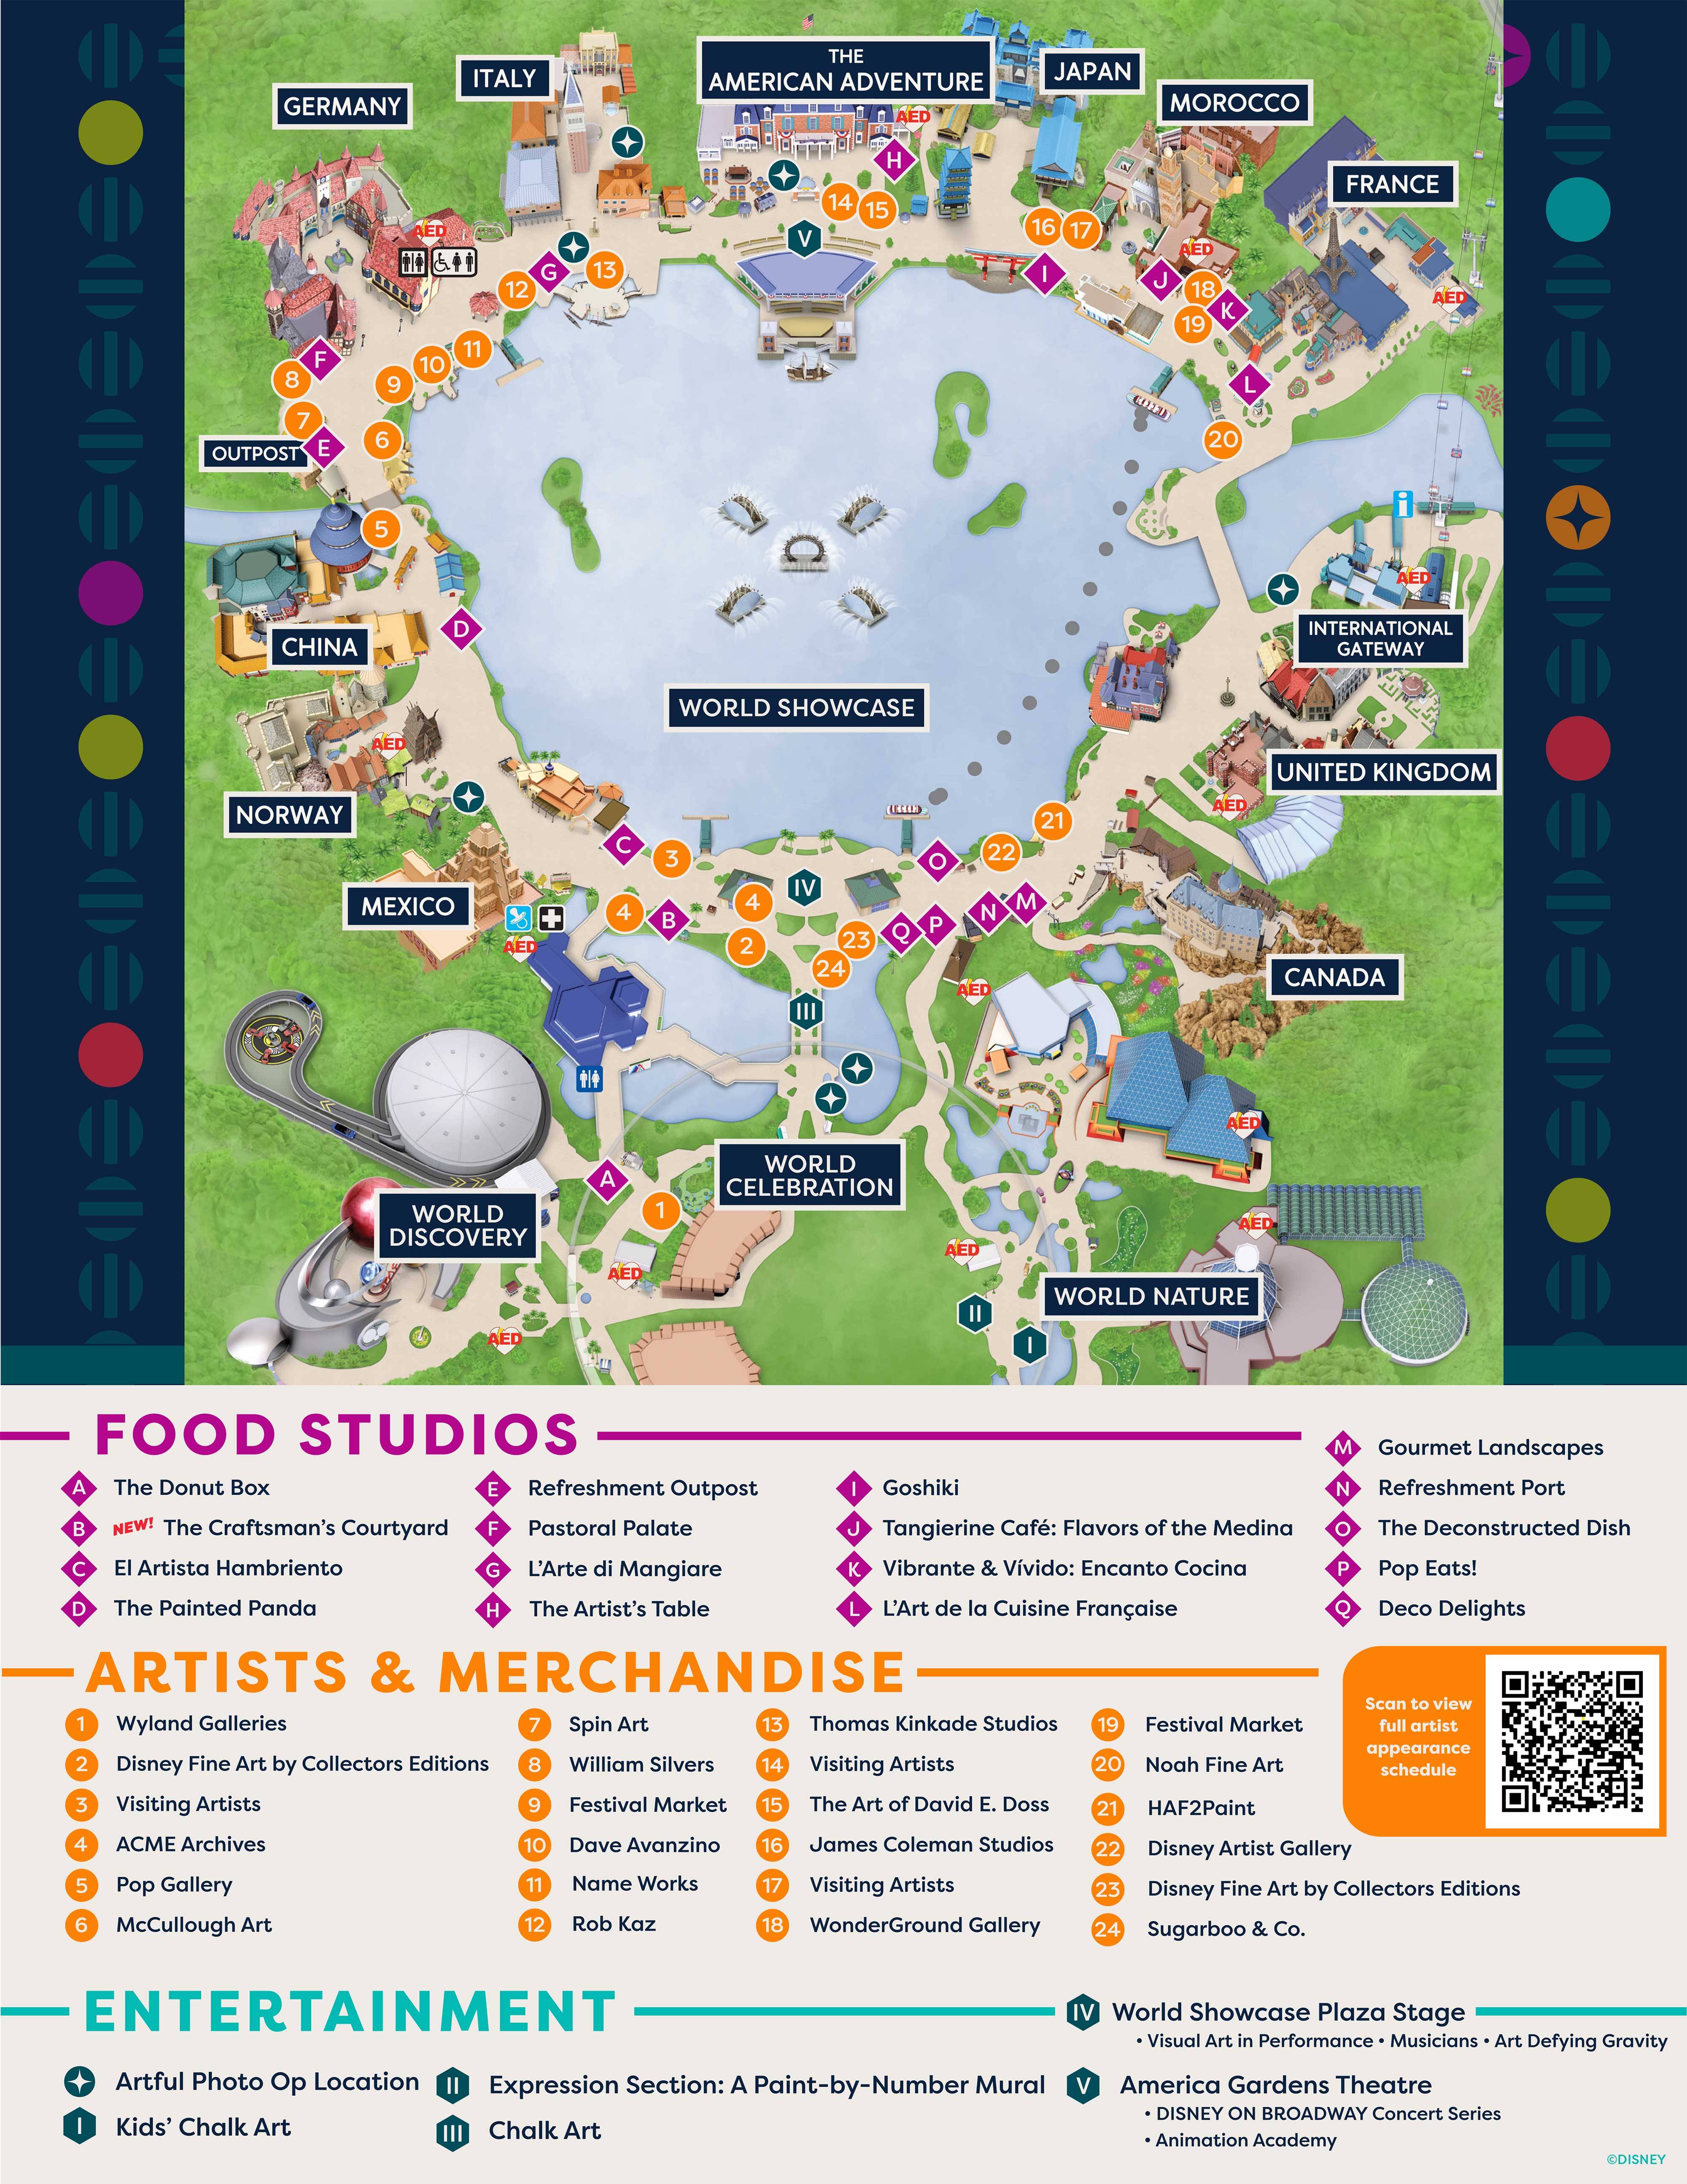 2022 EPCOT International Festival of the Arts logo and guide map